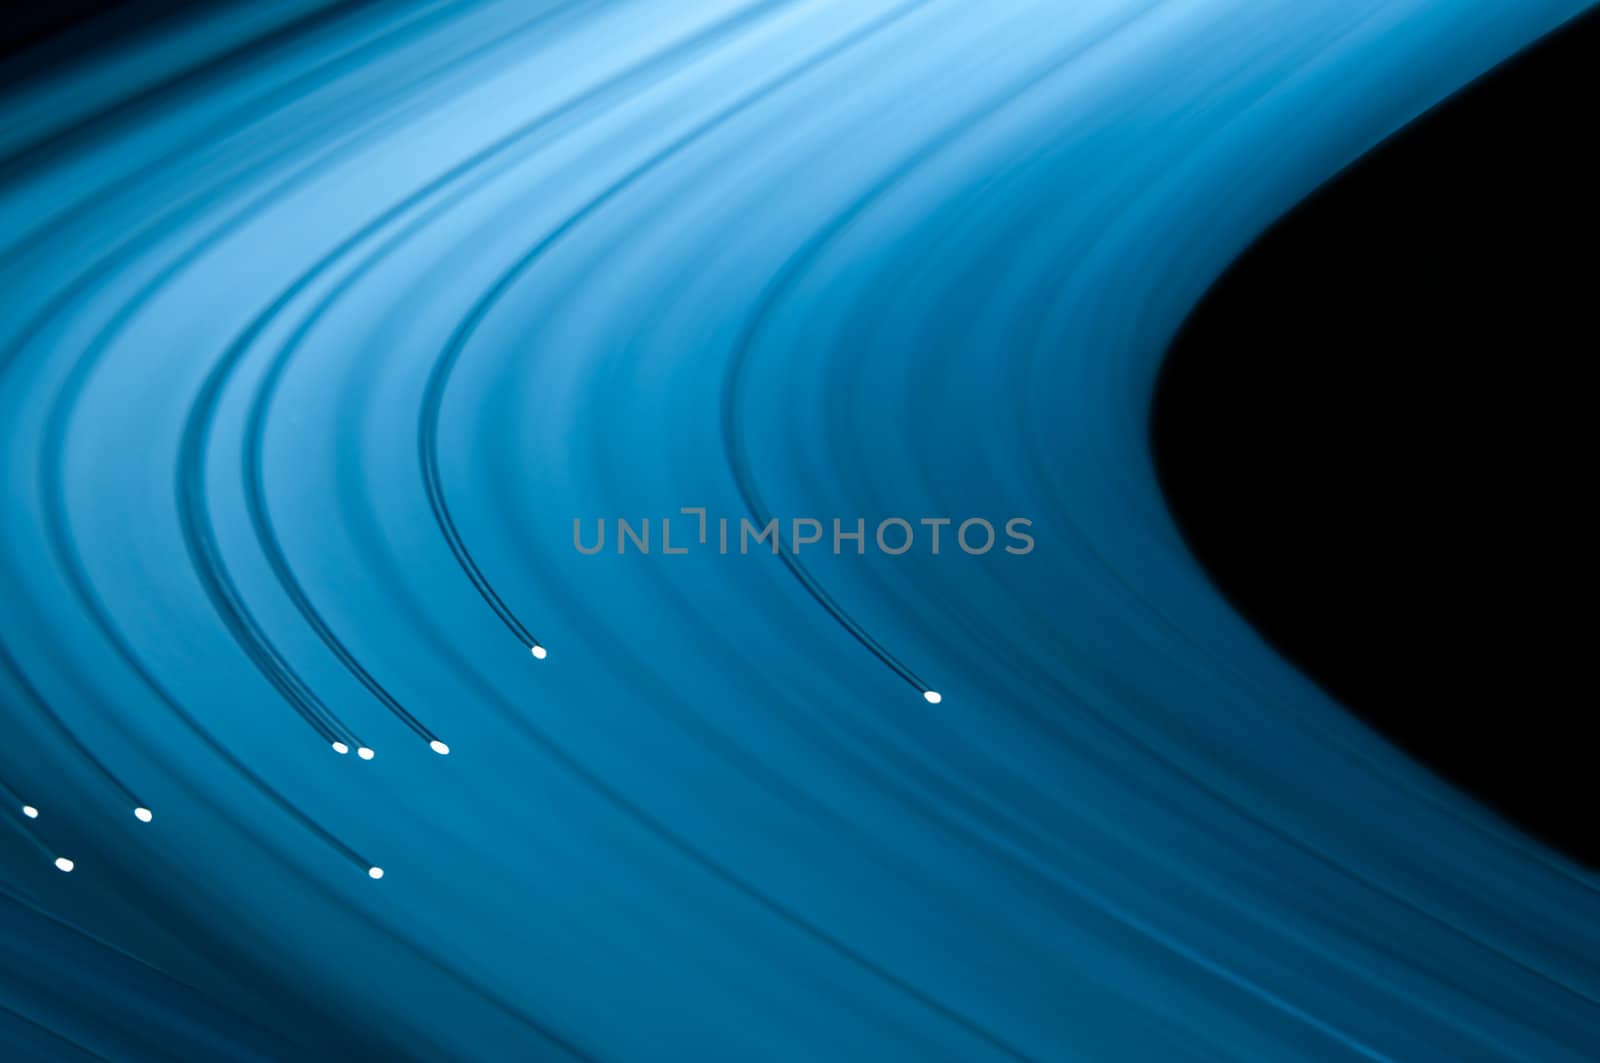 Close up capturing the ends of several illuminated fibre optic light strands against a vibrant blue background. Abstract style.